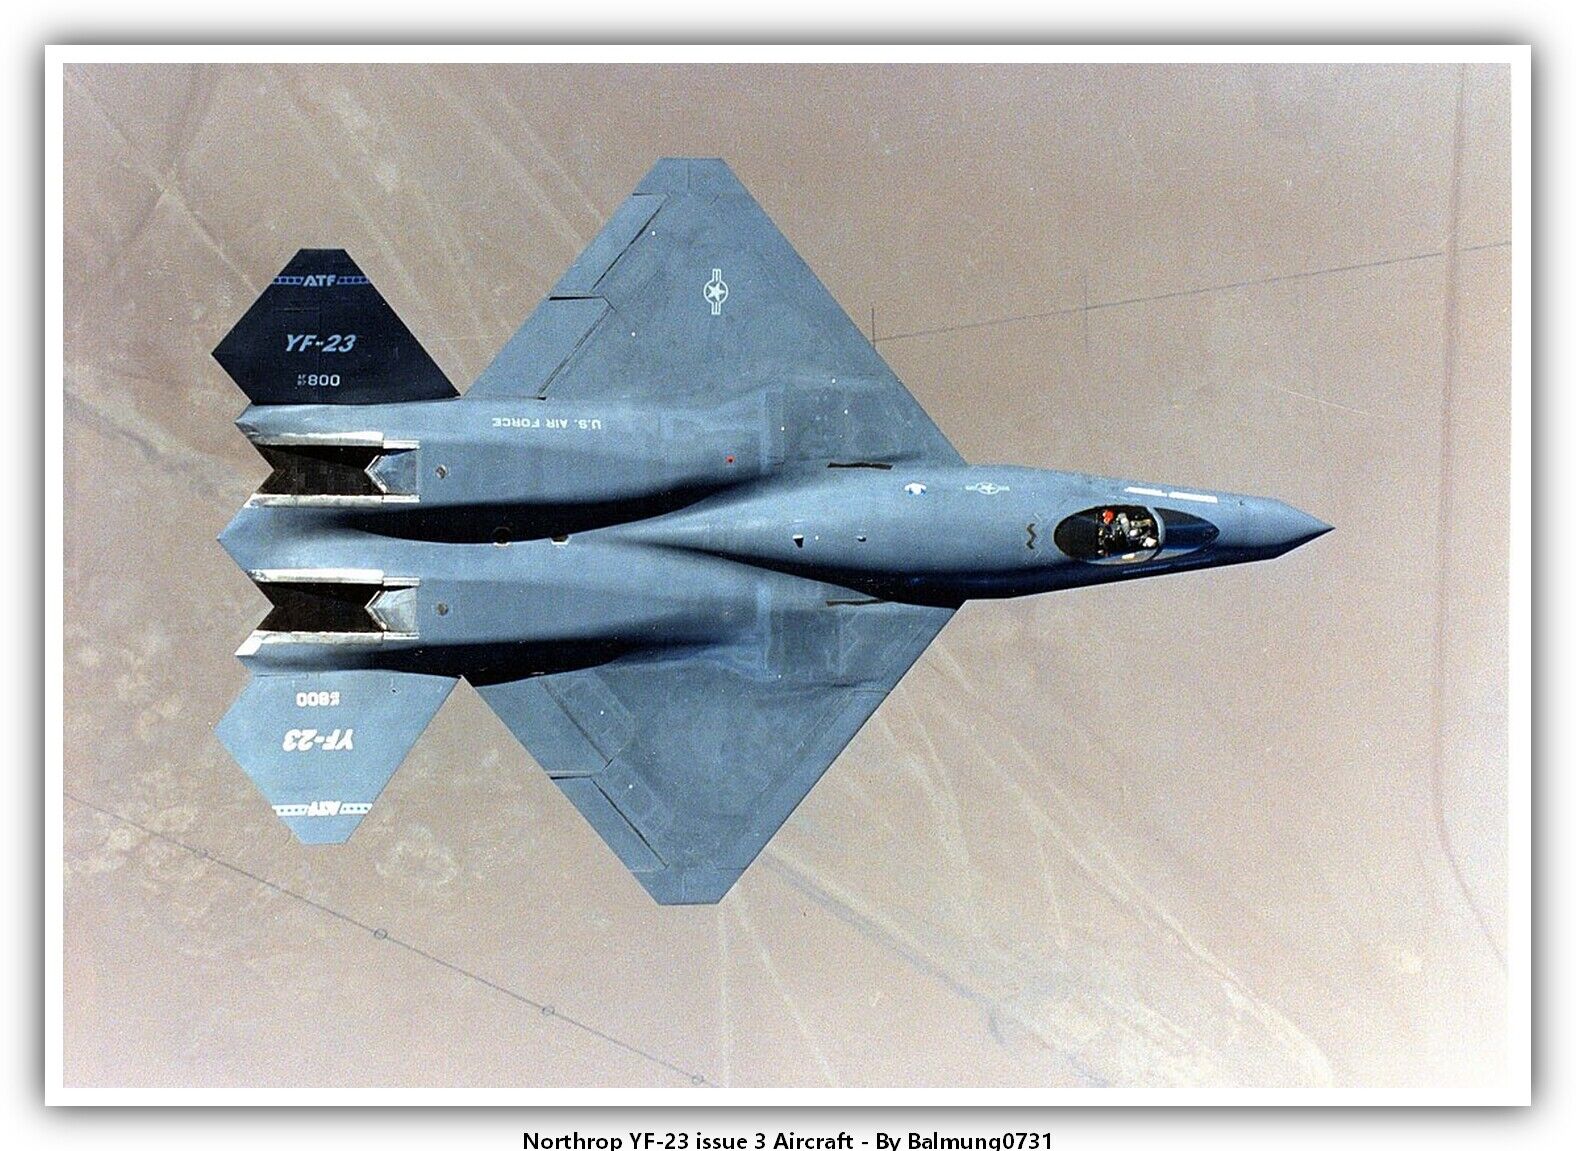 Northrop YF-23 Aircraft ✈️ Jet plane postcards in our massive eBay store  ✈️